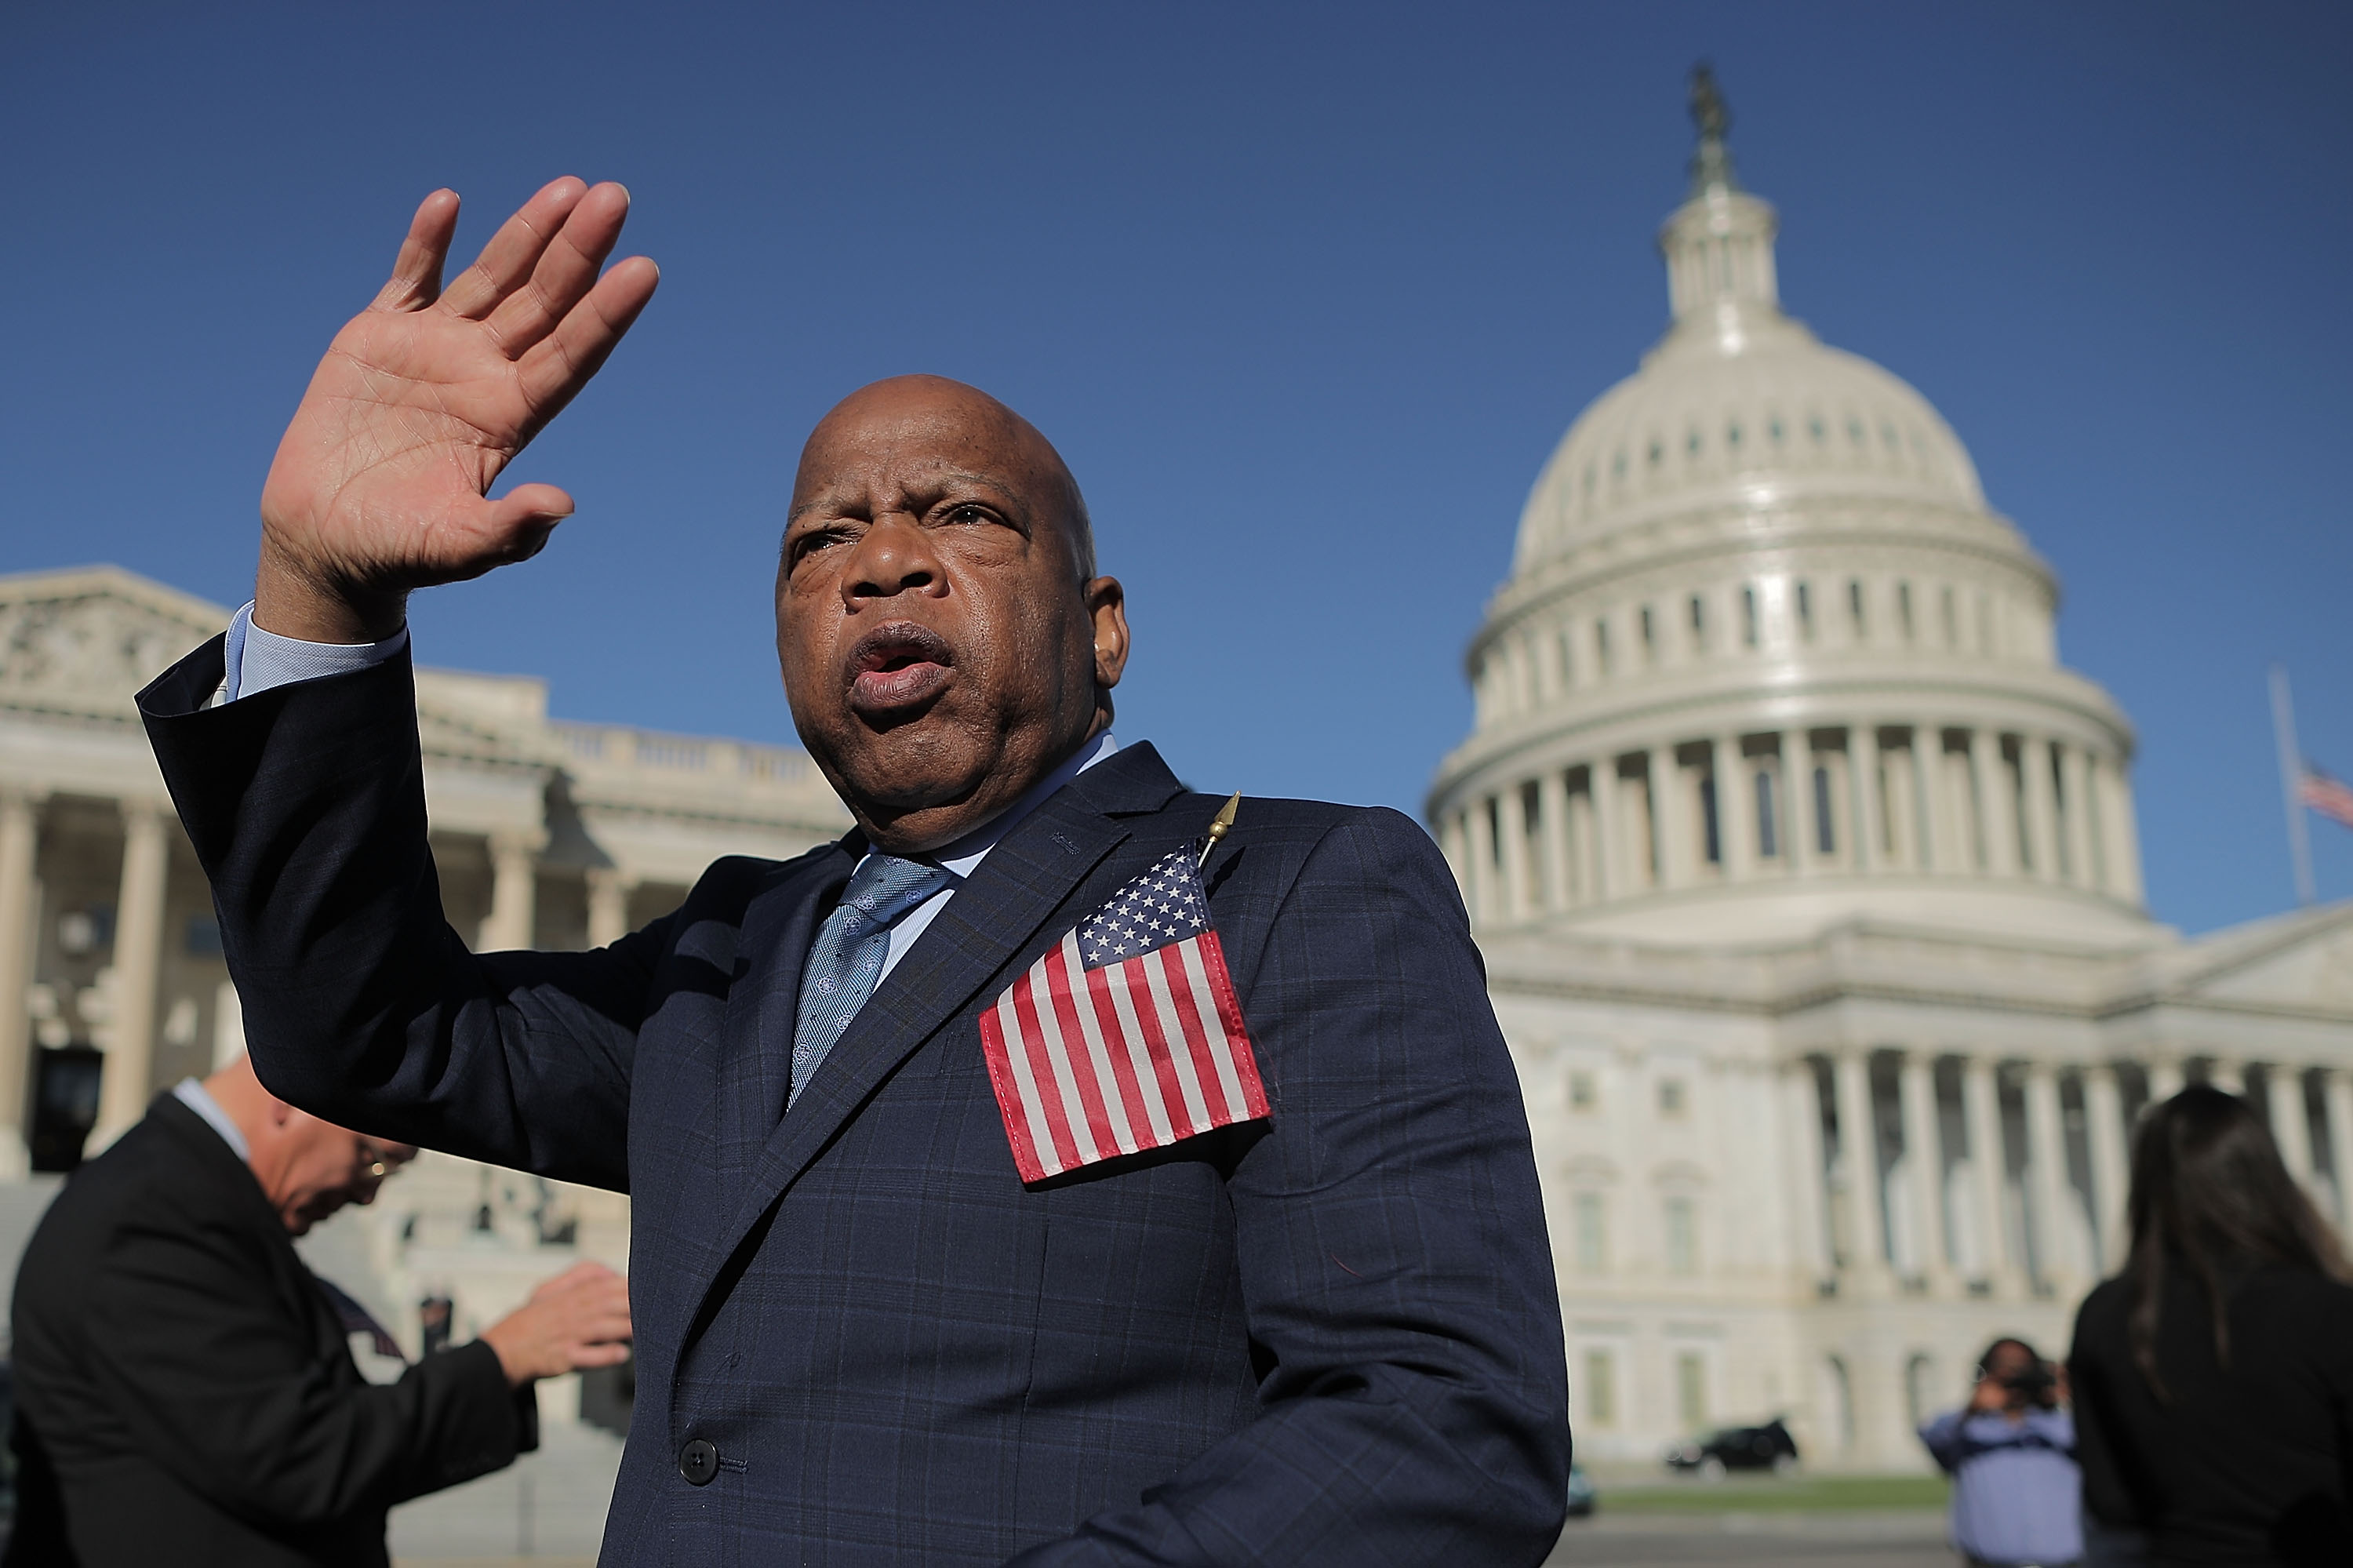 Rep. John Lewis (D-GA) thanks anti-gun violence supporters following a rally with fellow Democrats on the East Front steps of the U.S. House of Representatives October 4, 2017 in Washington, DC. (Chip Somodevilla&mdash;Getty Images)